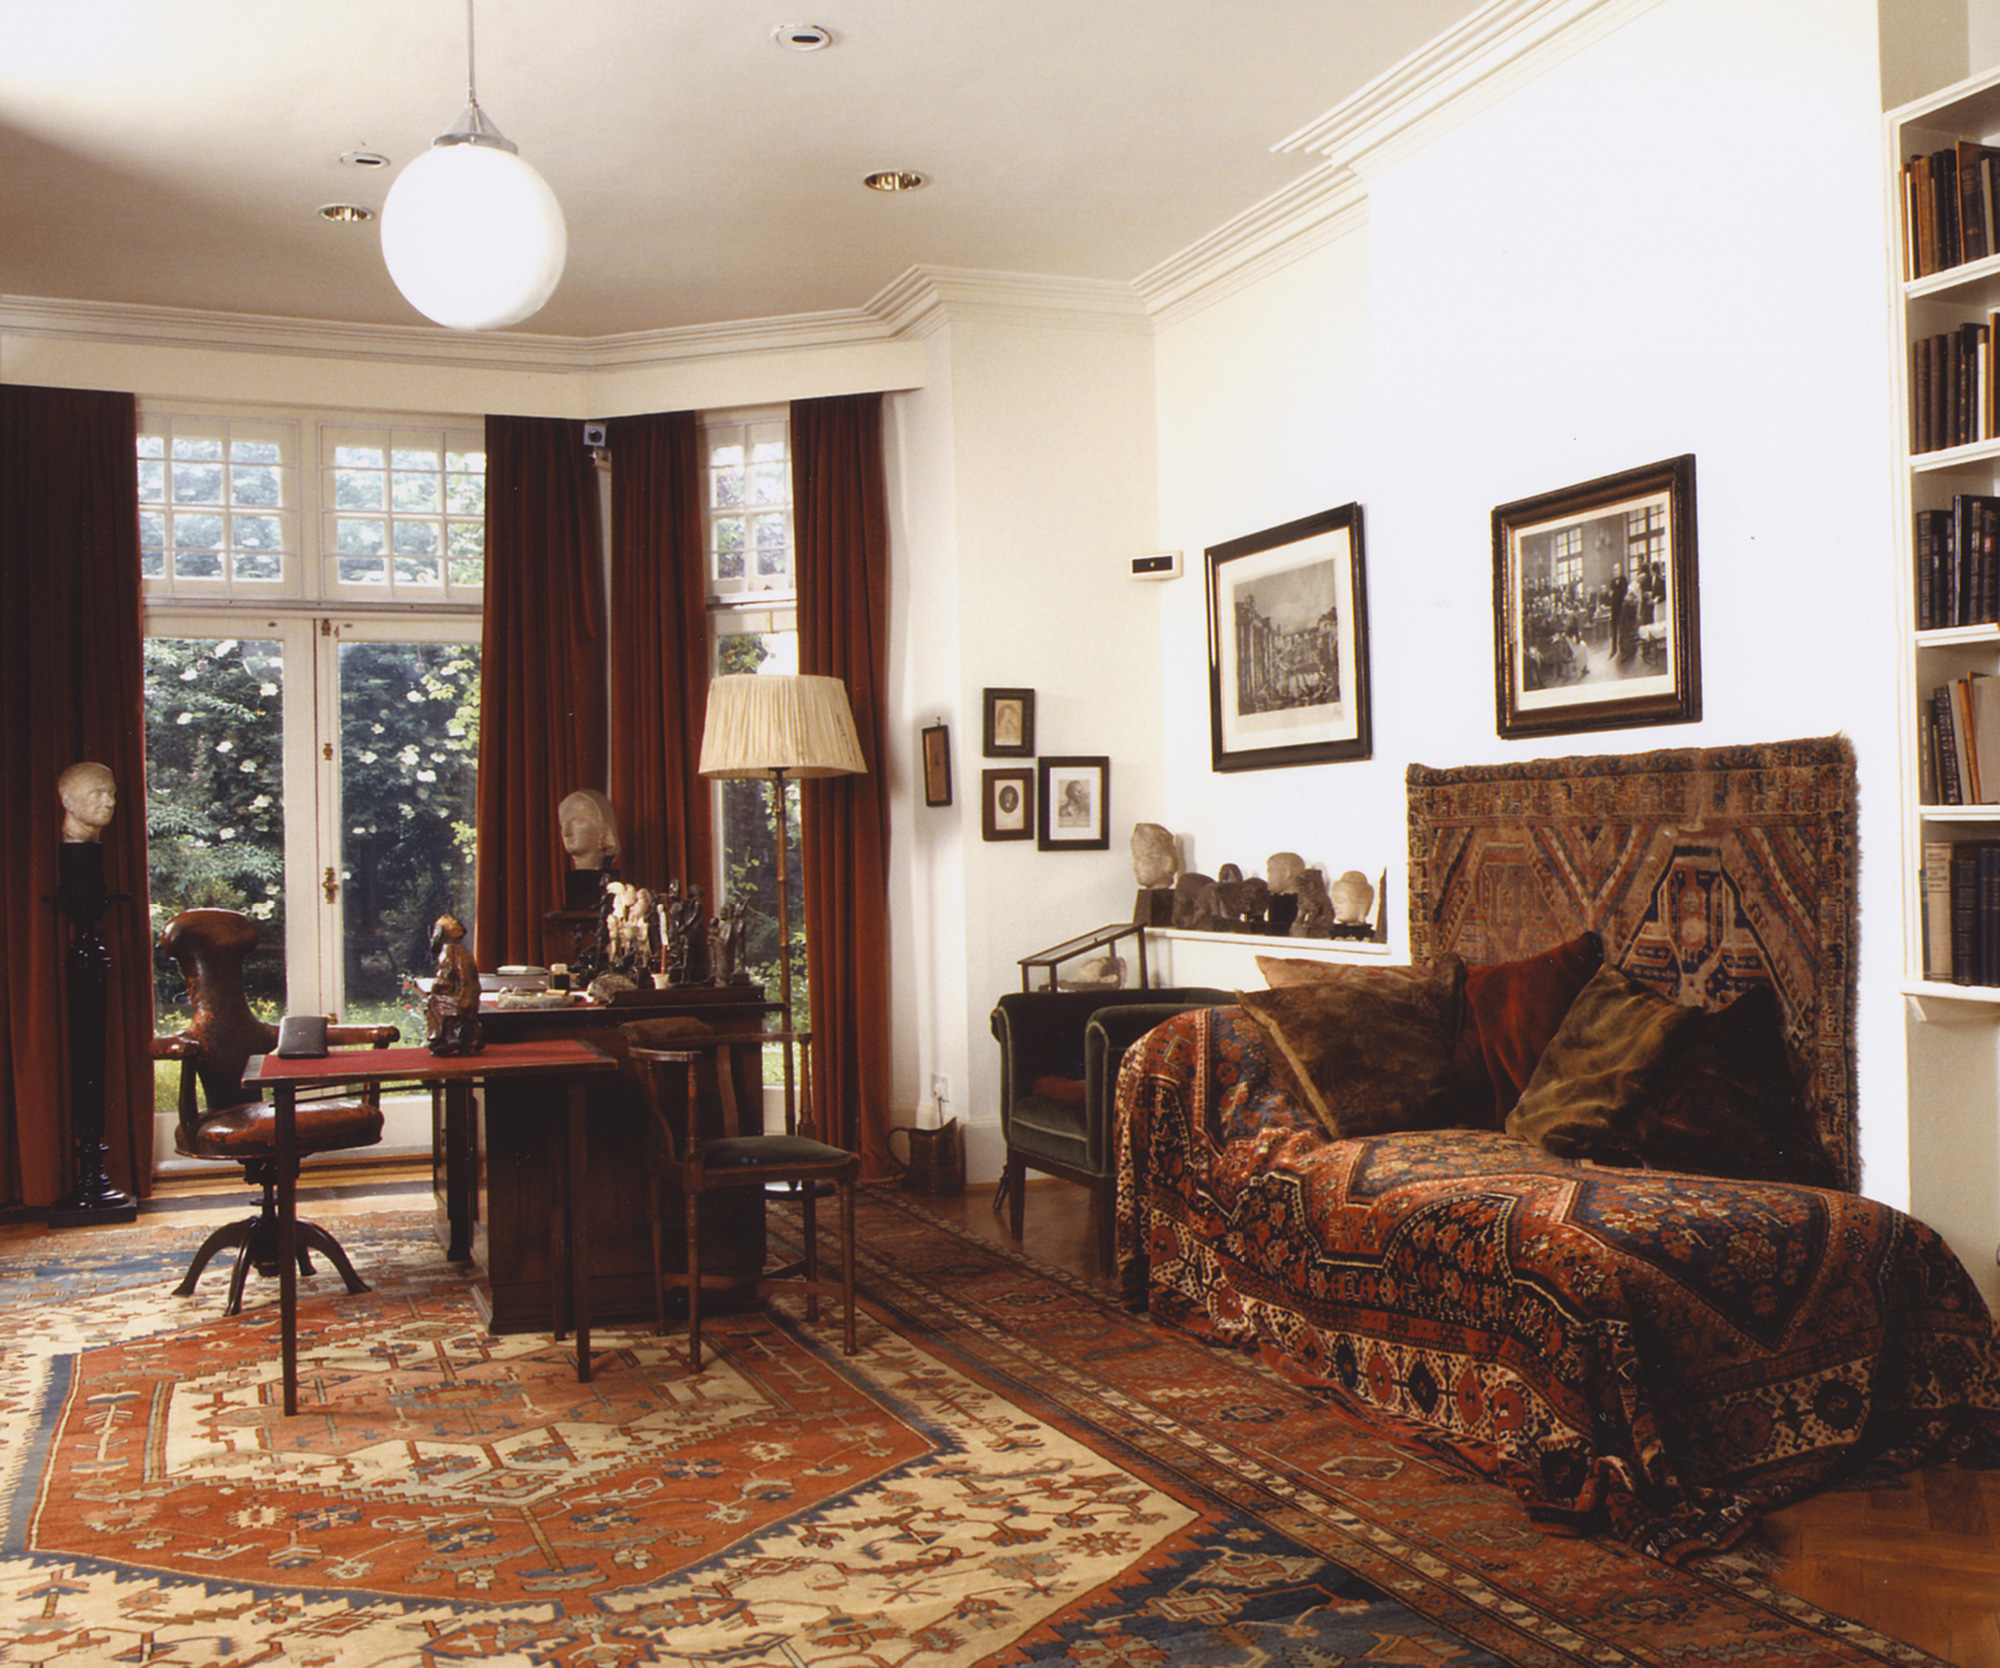 A photograph of Sigmund Freud’s consulting room in London.